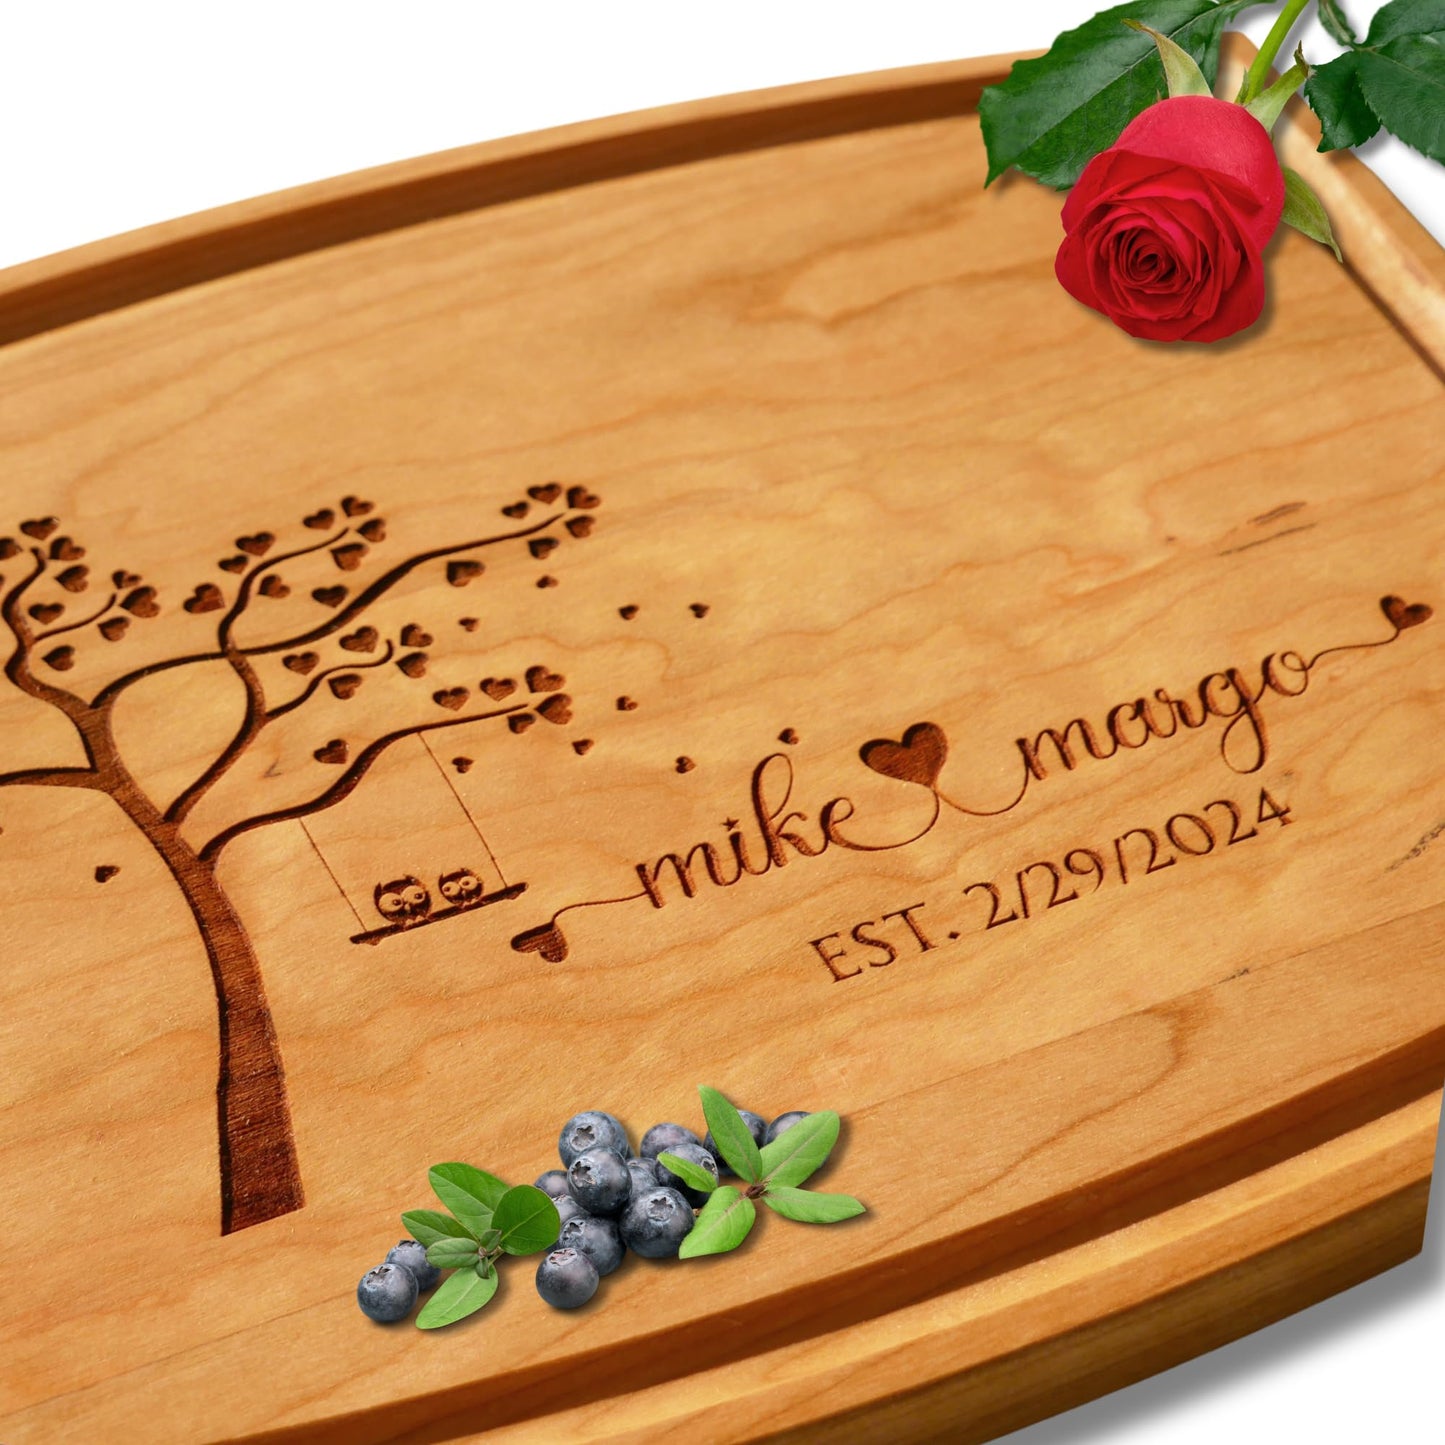 Handmade in USA - Wood Personalized Cutting Board - Unique Wedding Gift Idea for Couples, Anniversary, Christmas, Bridal Shower, Housewarming - Many